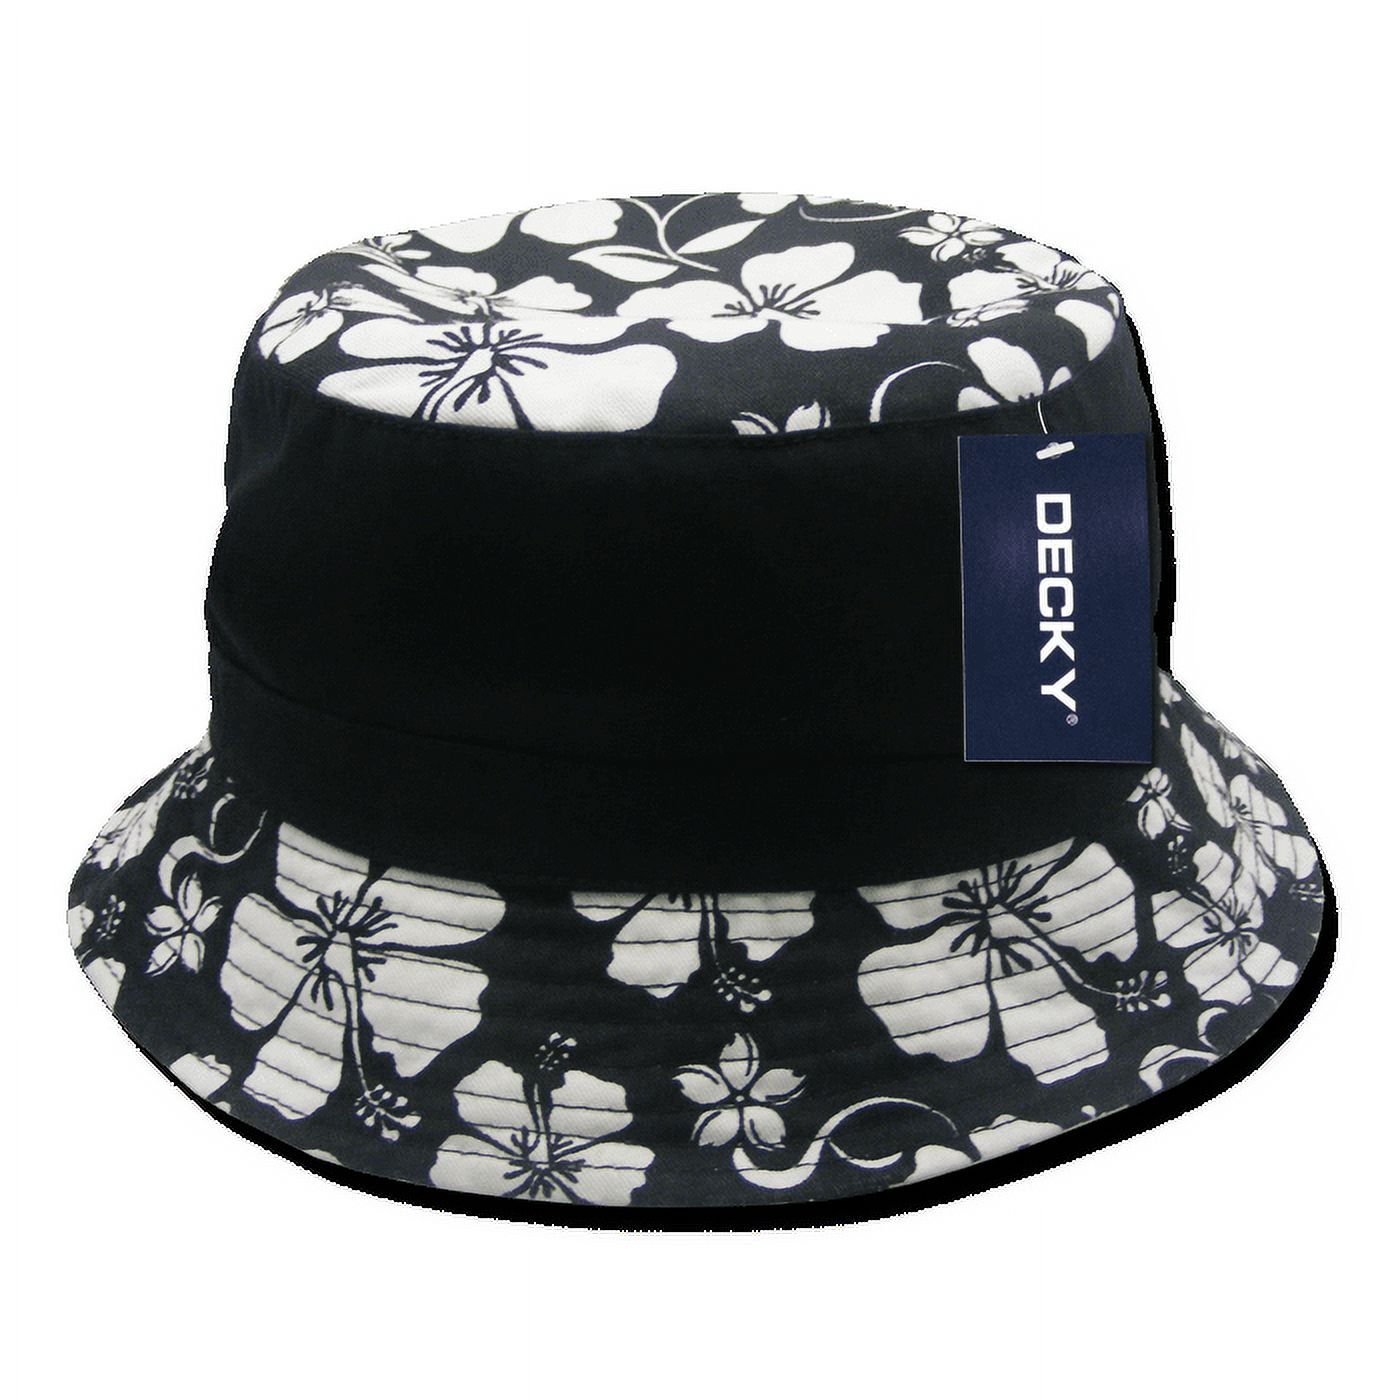 Decky Floral Polo Unconstructed Bucket Caps Hats For Men Women Black - image 1 of 2